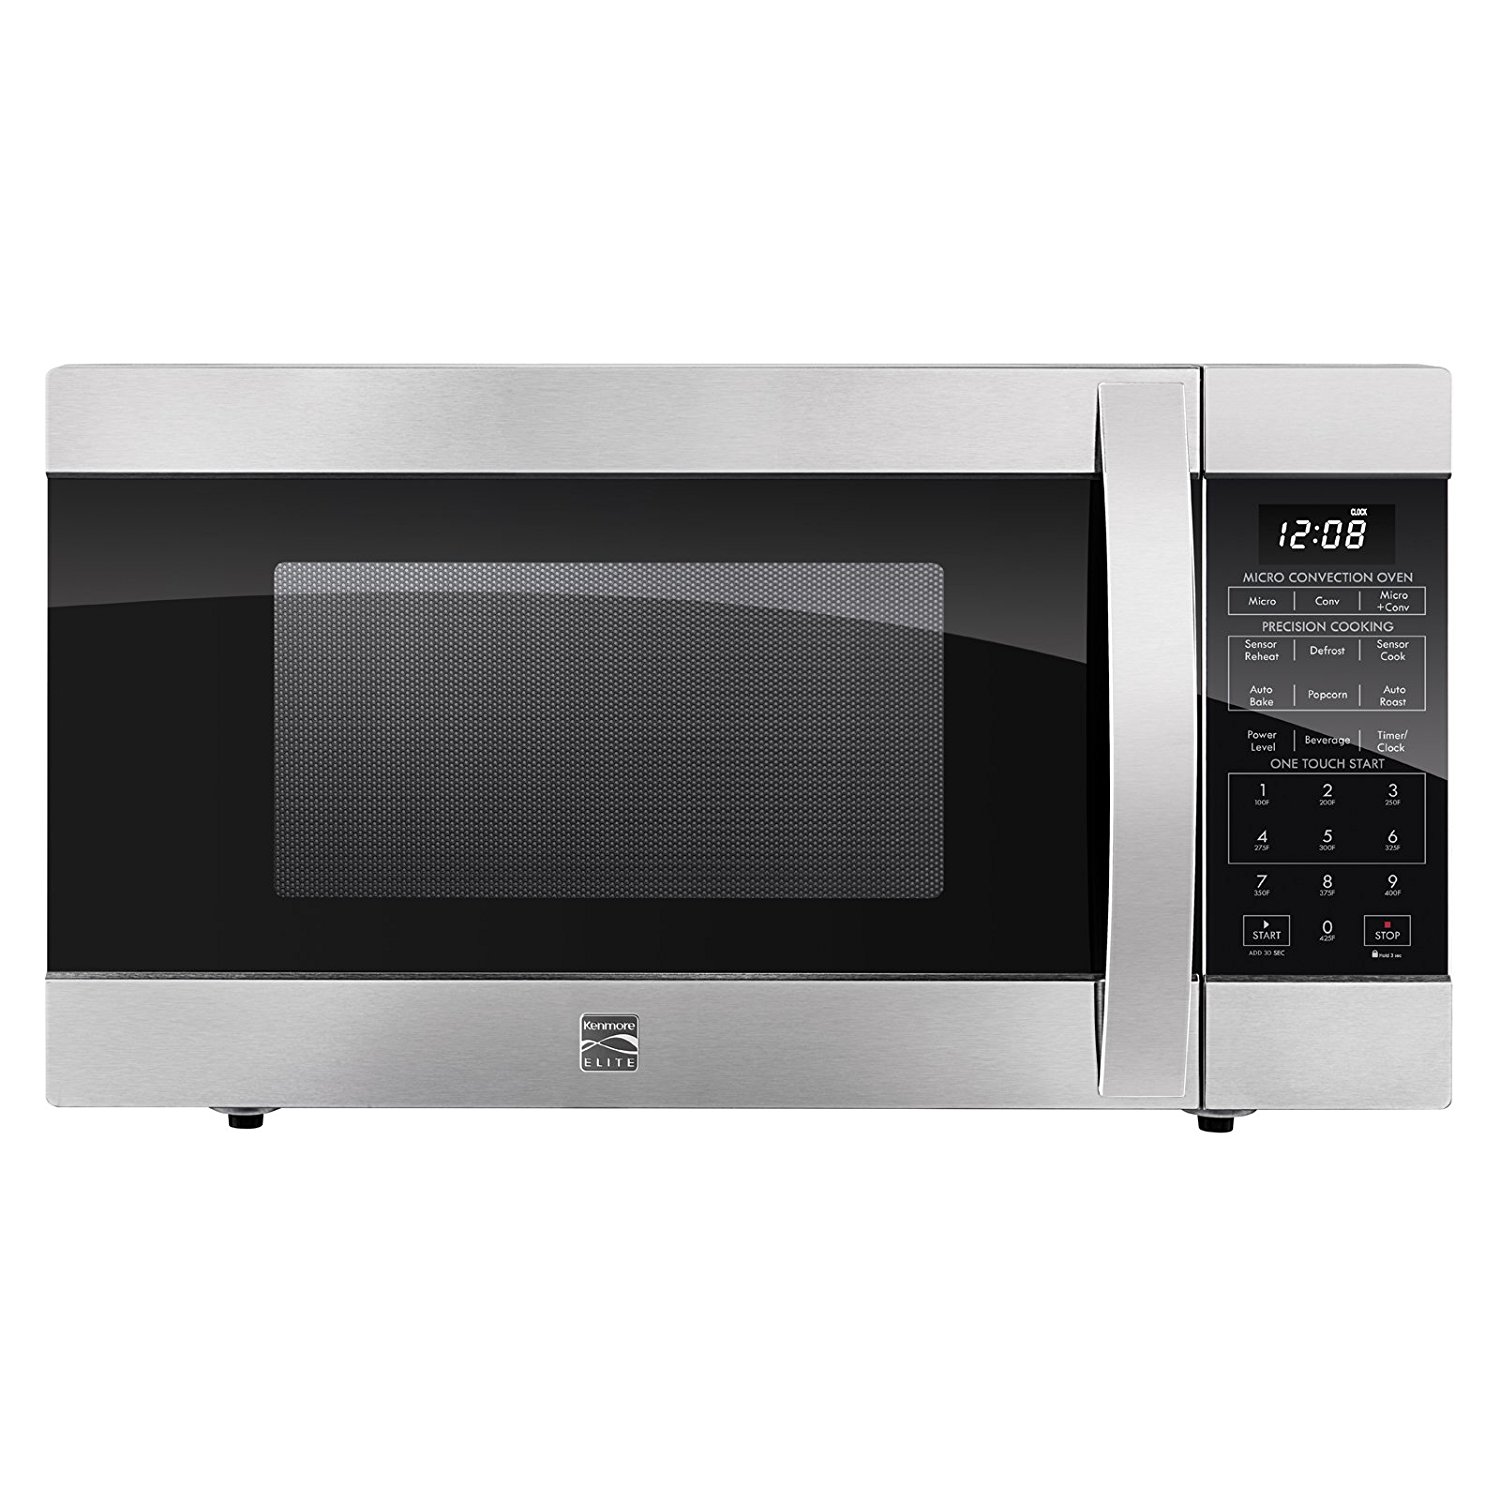 Kenmore 1.5 cu ft Convection Microwave Oven Combo 77603